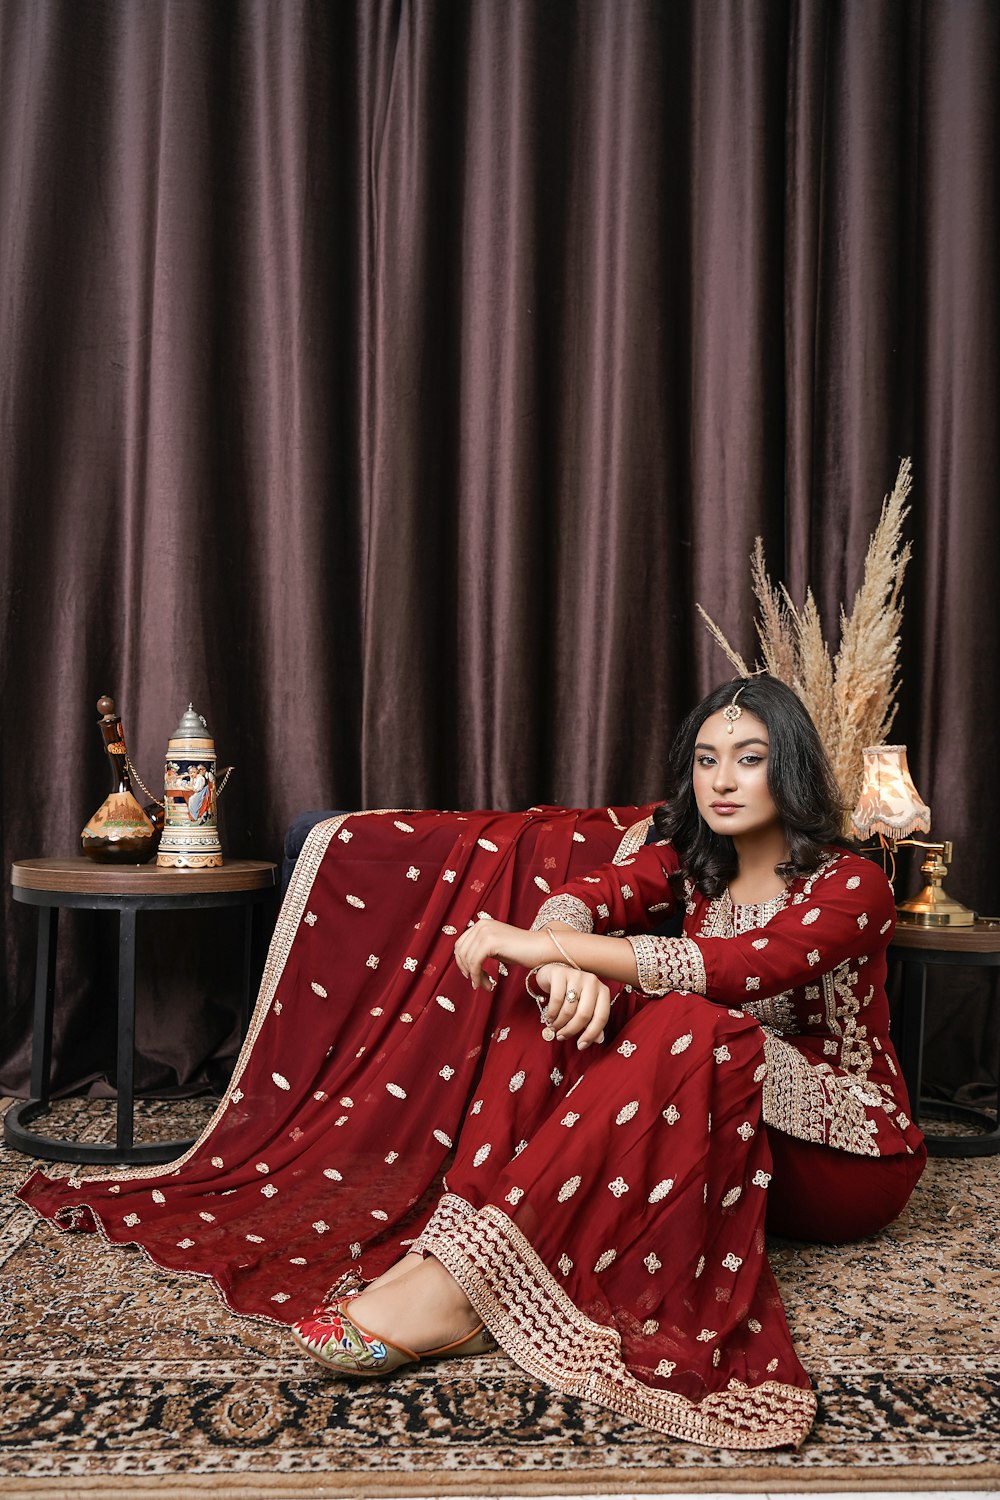 a woman in a red dress sitting on a rug